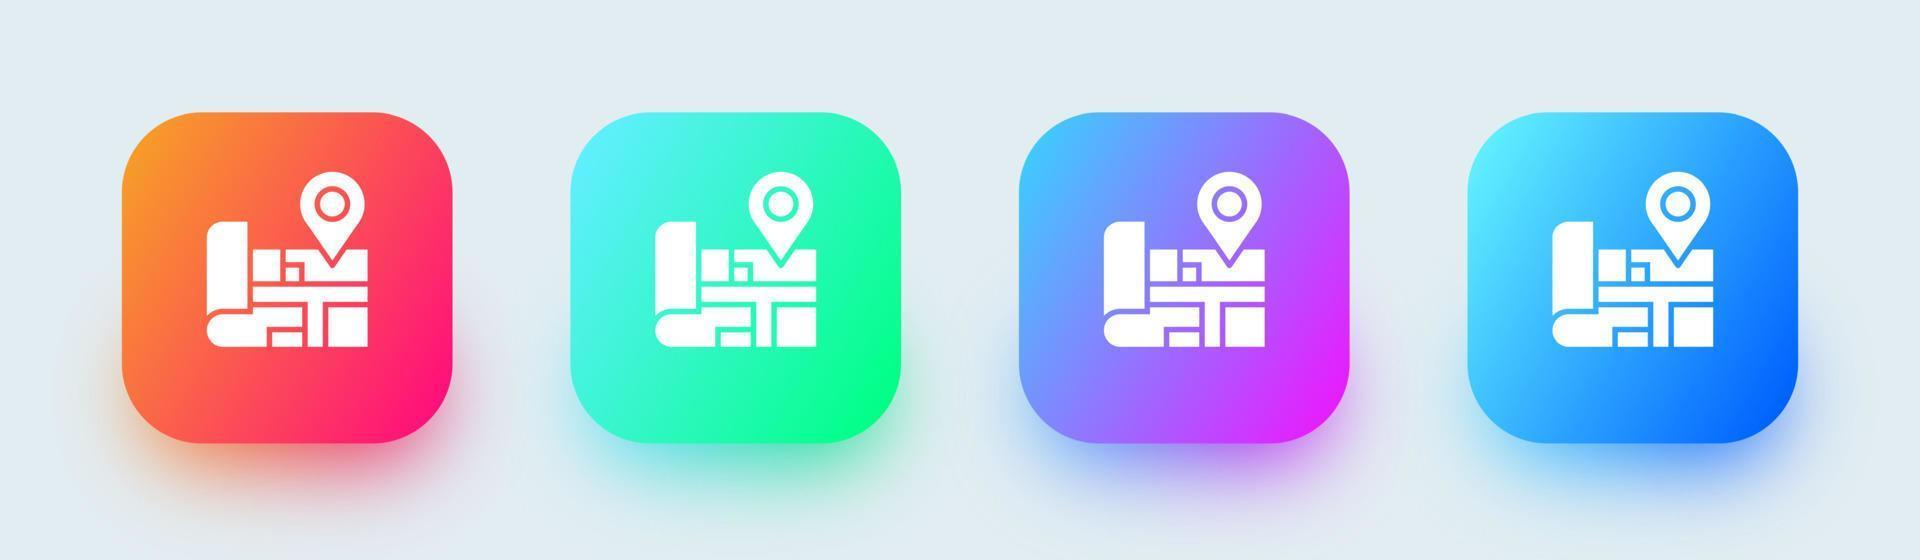 Maps solid icon in square gradient colors. Location pin signs vector illustration.